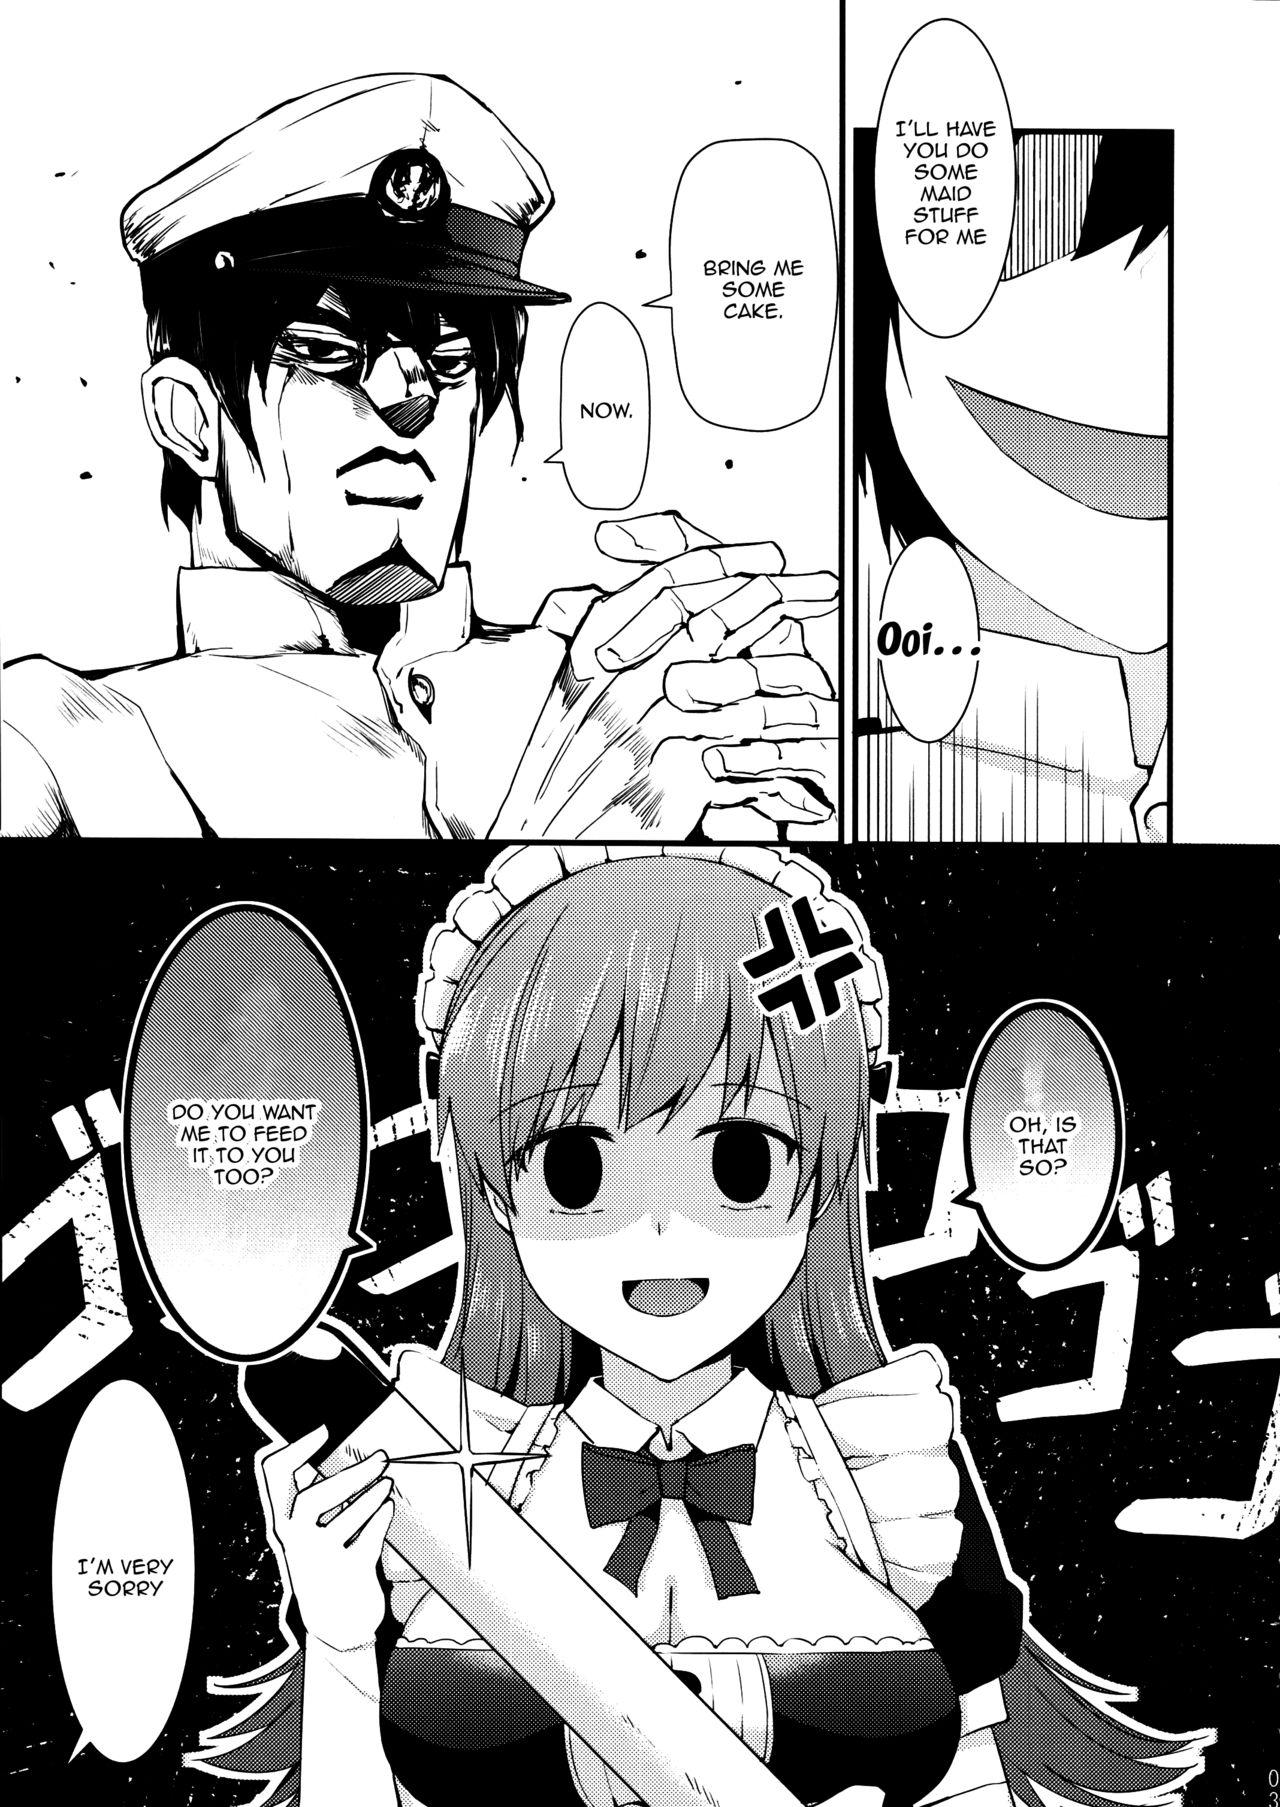 Macho Ooi! Maid Fuku o Kite miyou! | Ooi! Try On These Maid Clothes! - Kantai collection Gay Boyporn - Page 4